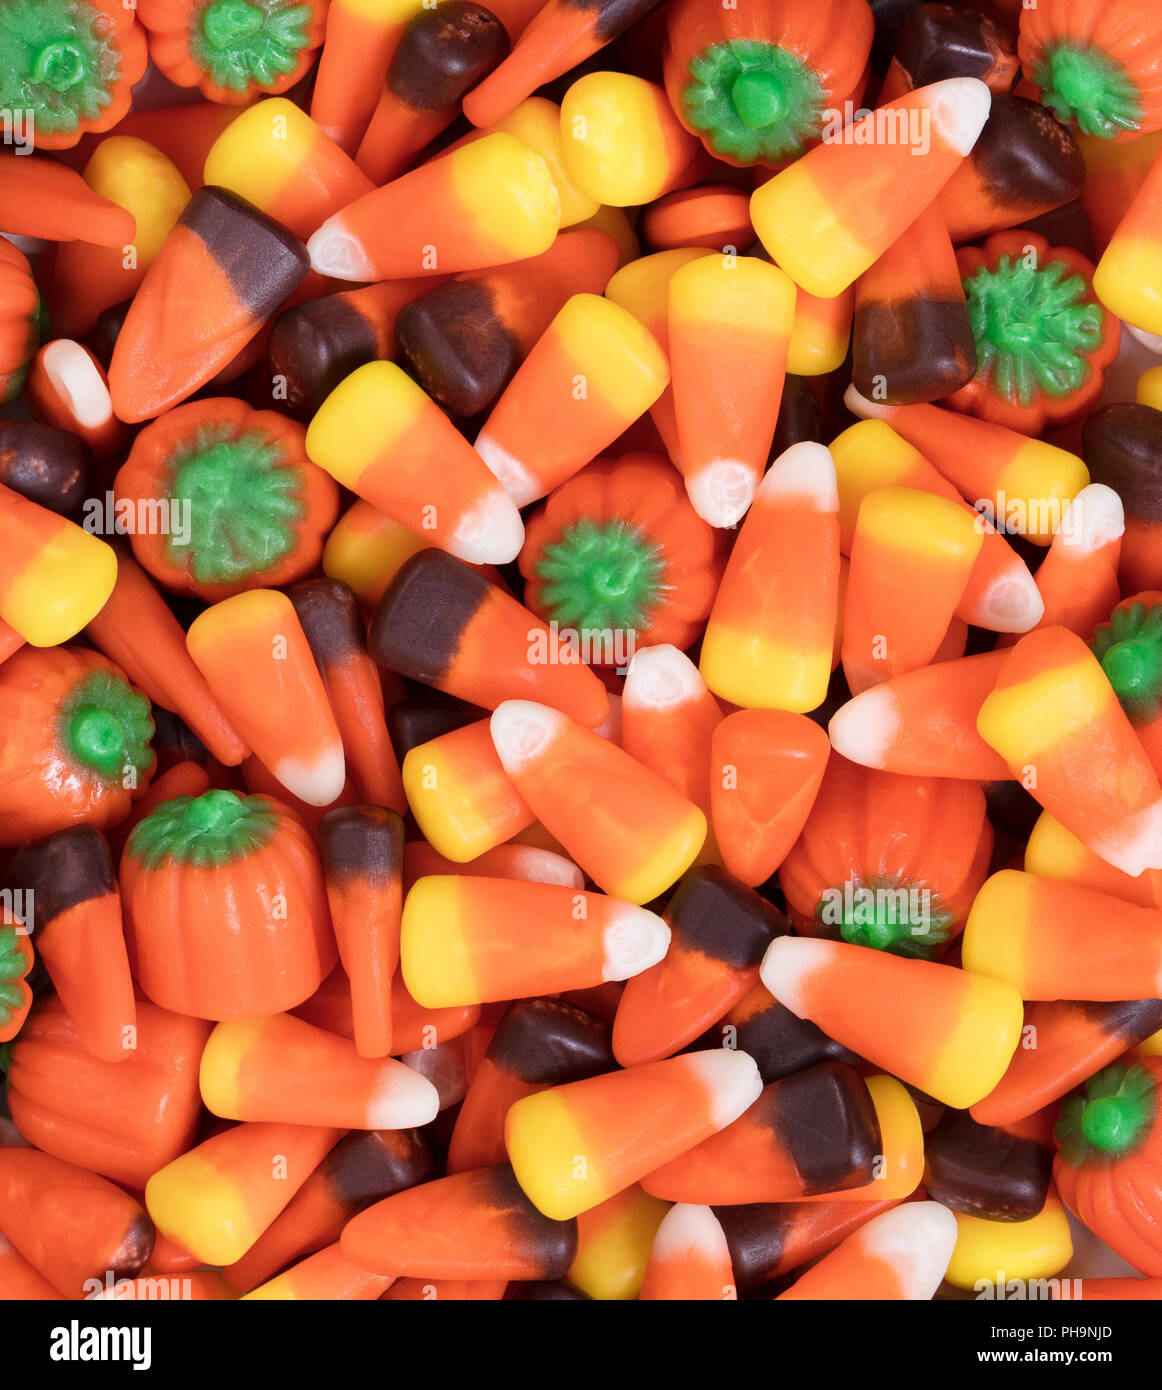 Filled frame of autumn holiday candy corn and pumpkin shapes Stock Photo